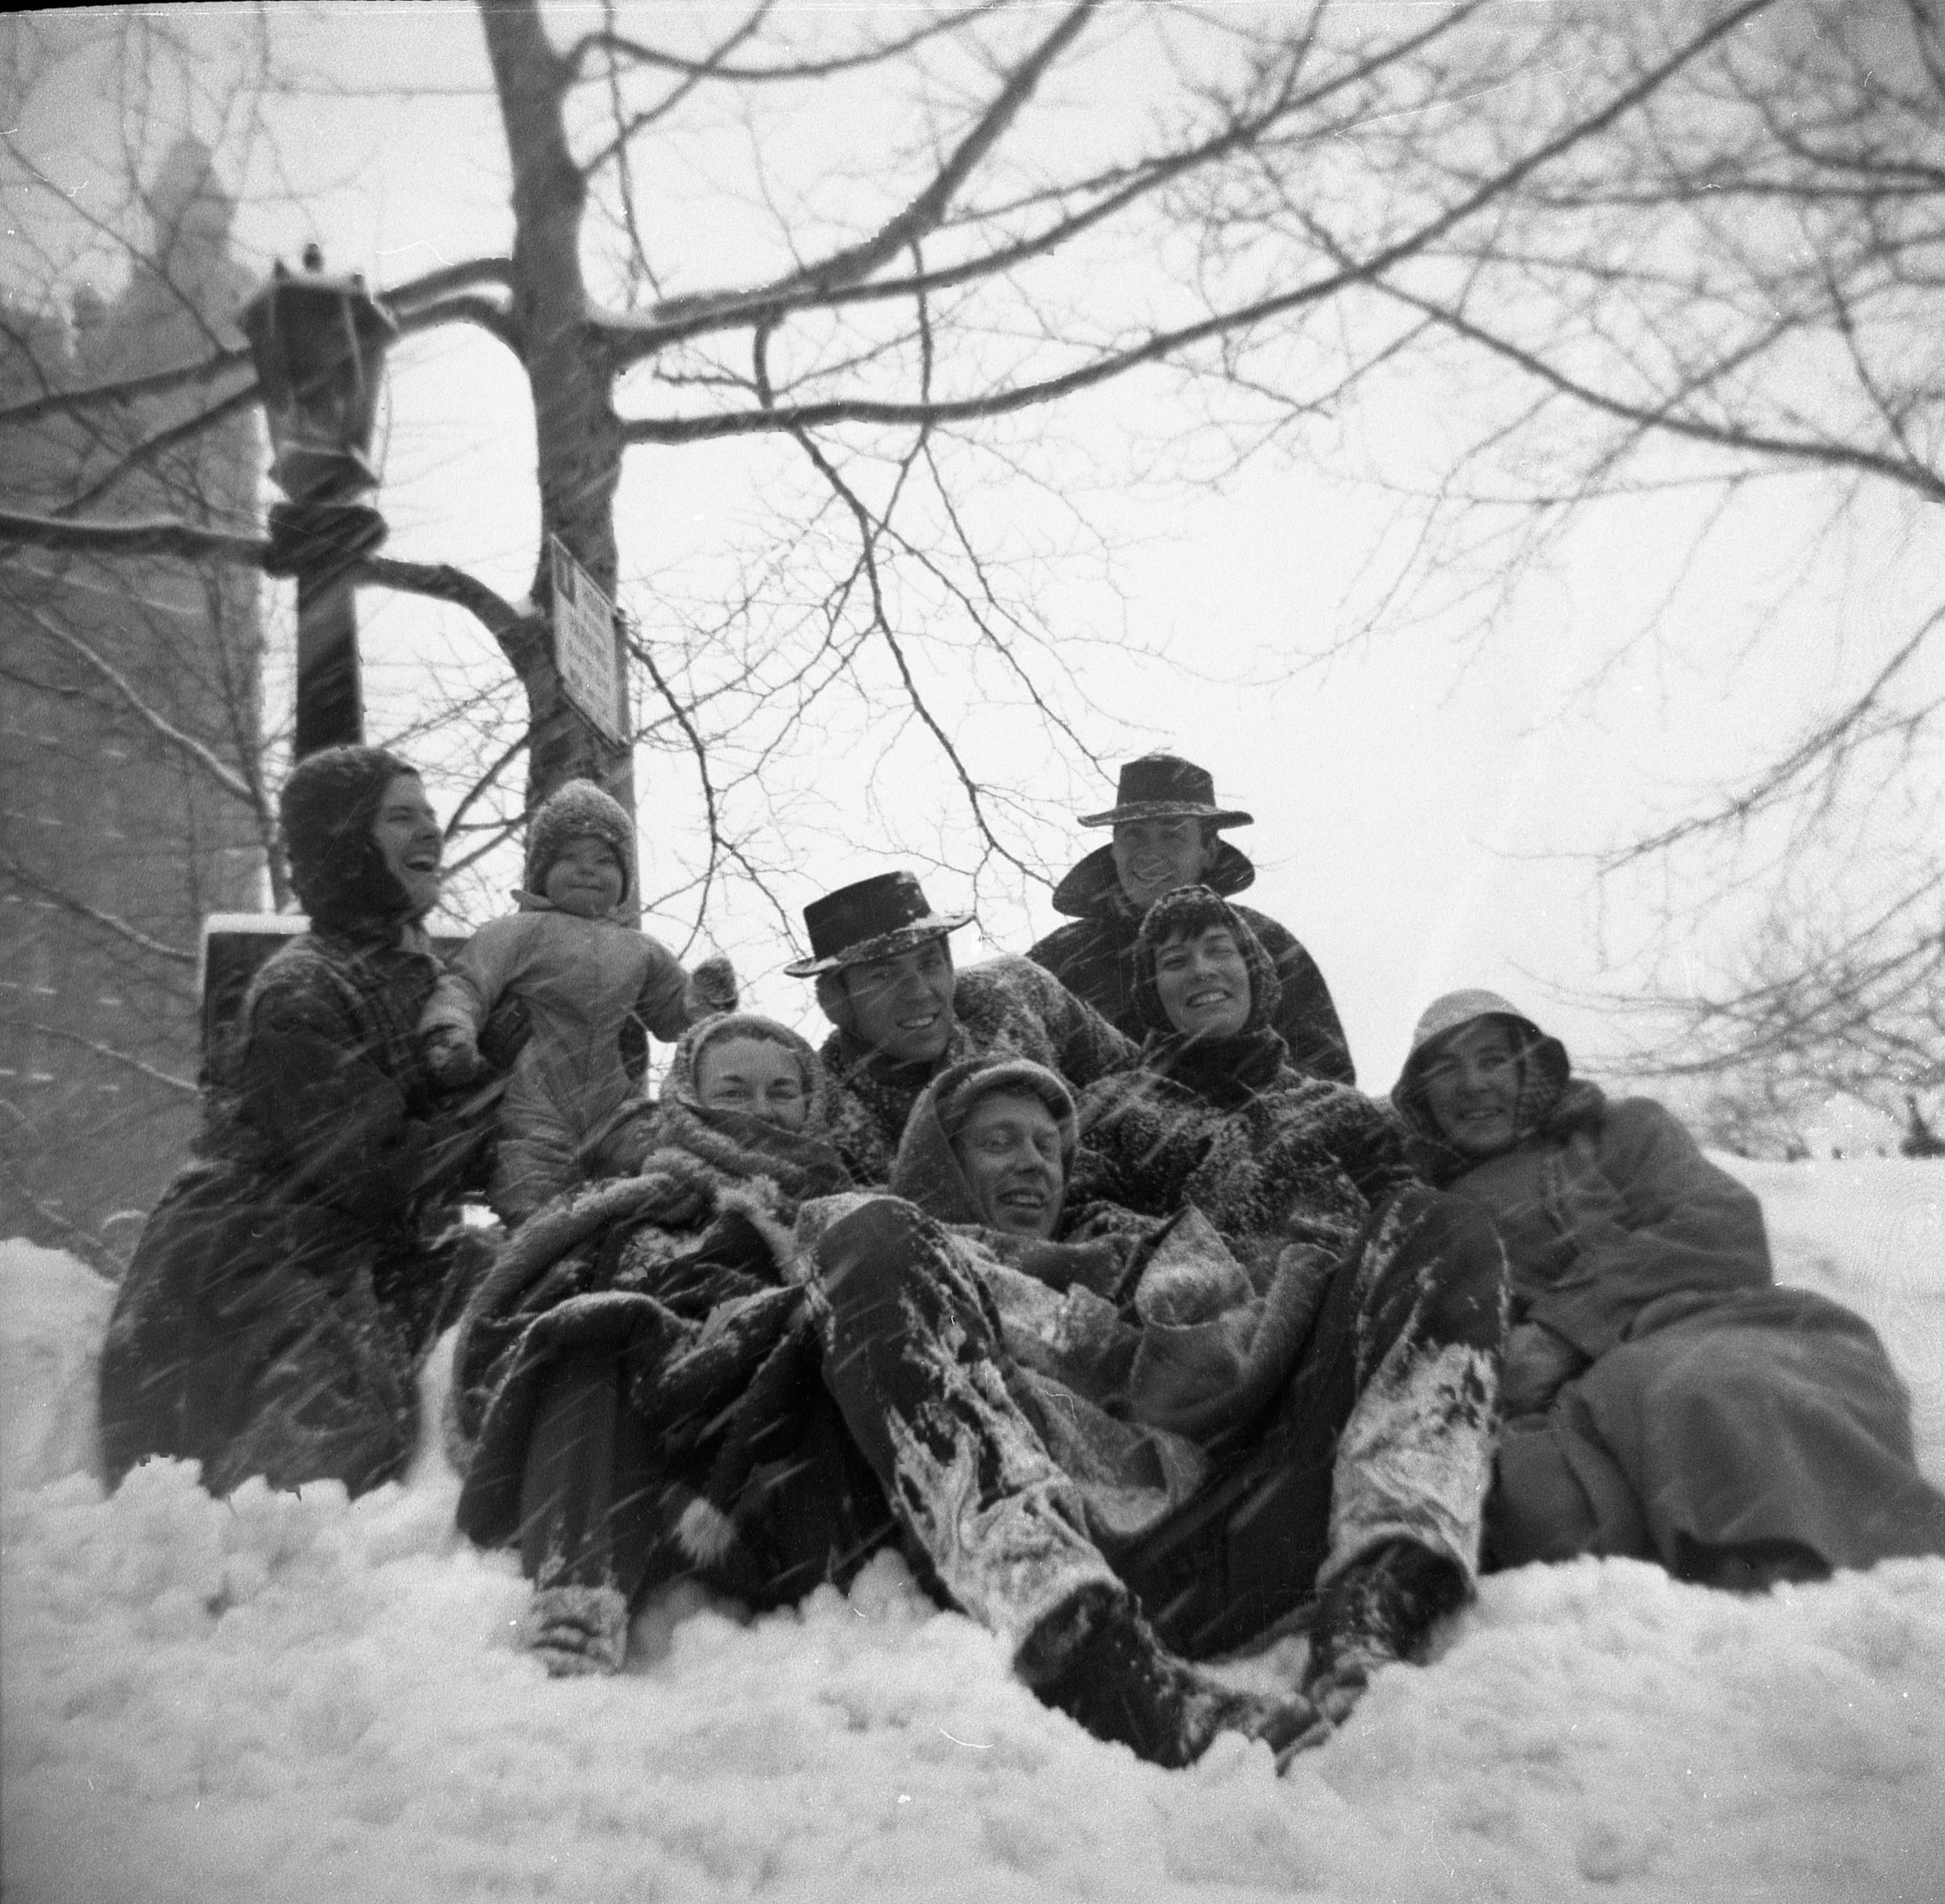 Photo of a group of New York artists, including Ellsworth Kelly, Robert Indiana and Agnes Martin, posed together sitting in the snow.